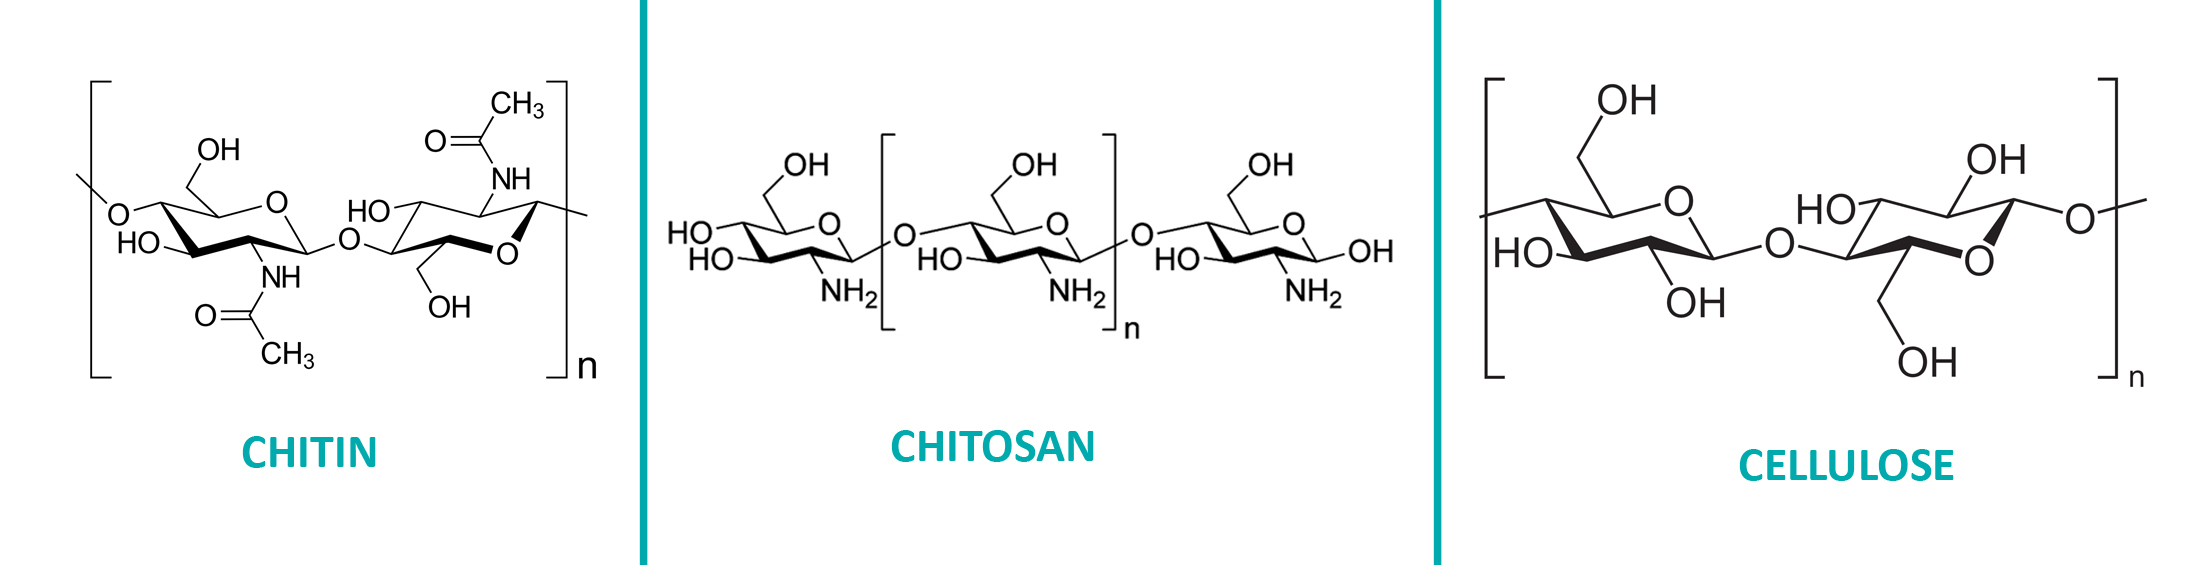 Comparison in terms of chemical structure of chitin, chitosan and cellulose.